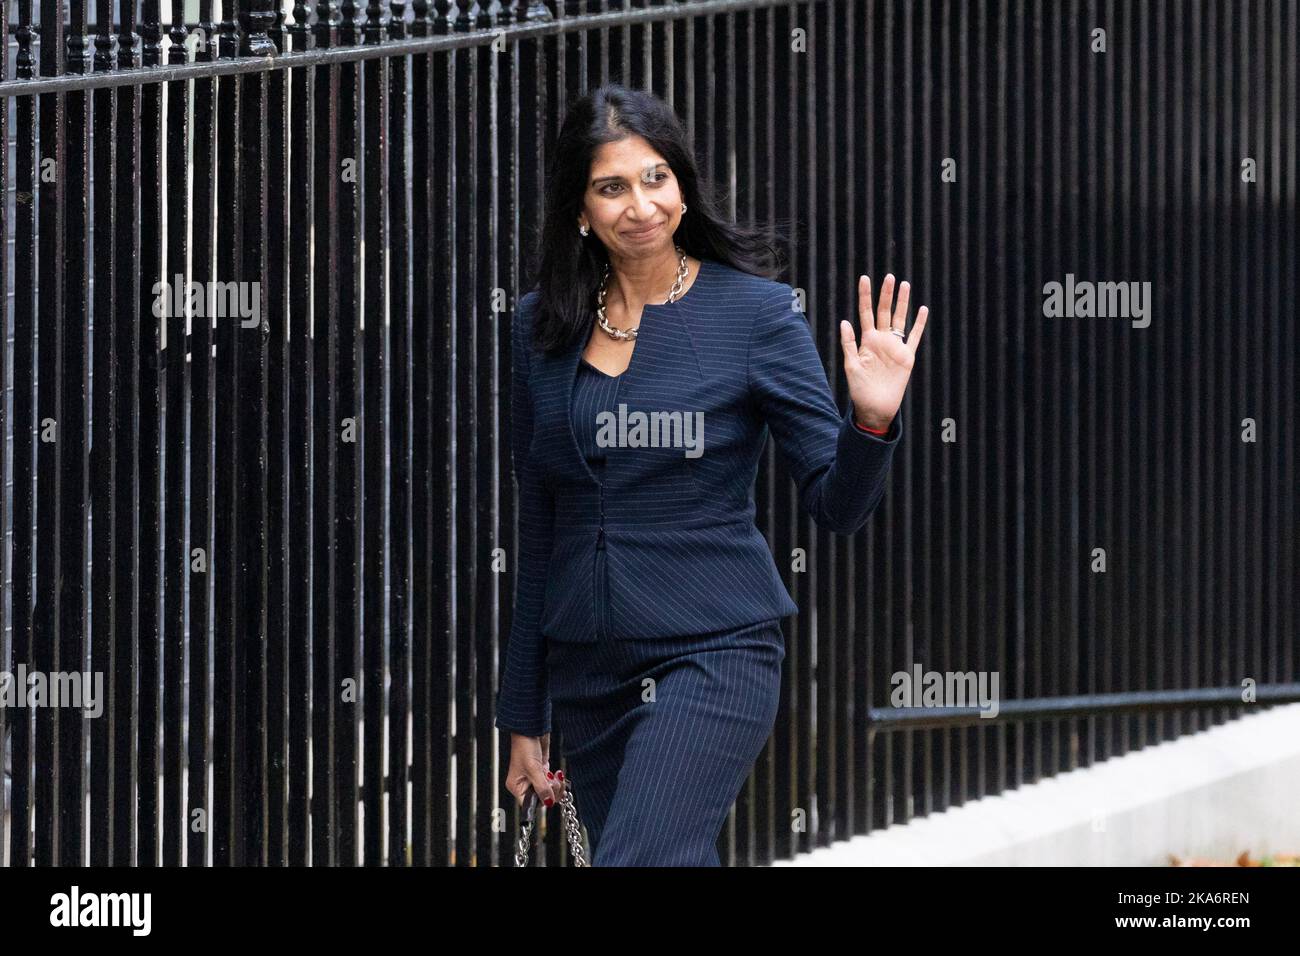 Suella Braverman arrives at Downing Street this afternoon as Prime Minister Rishi Sunk appoints his cabinet ministers.   Image shot on Stock Photo